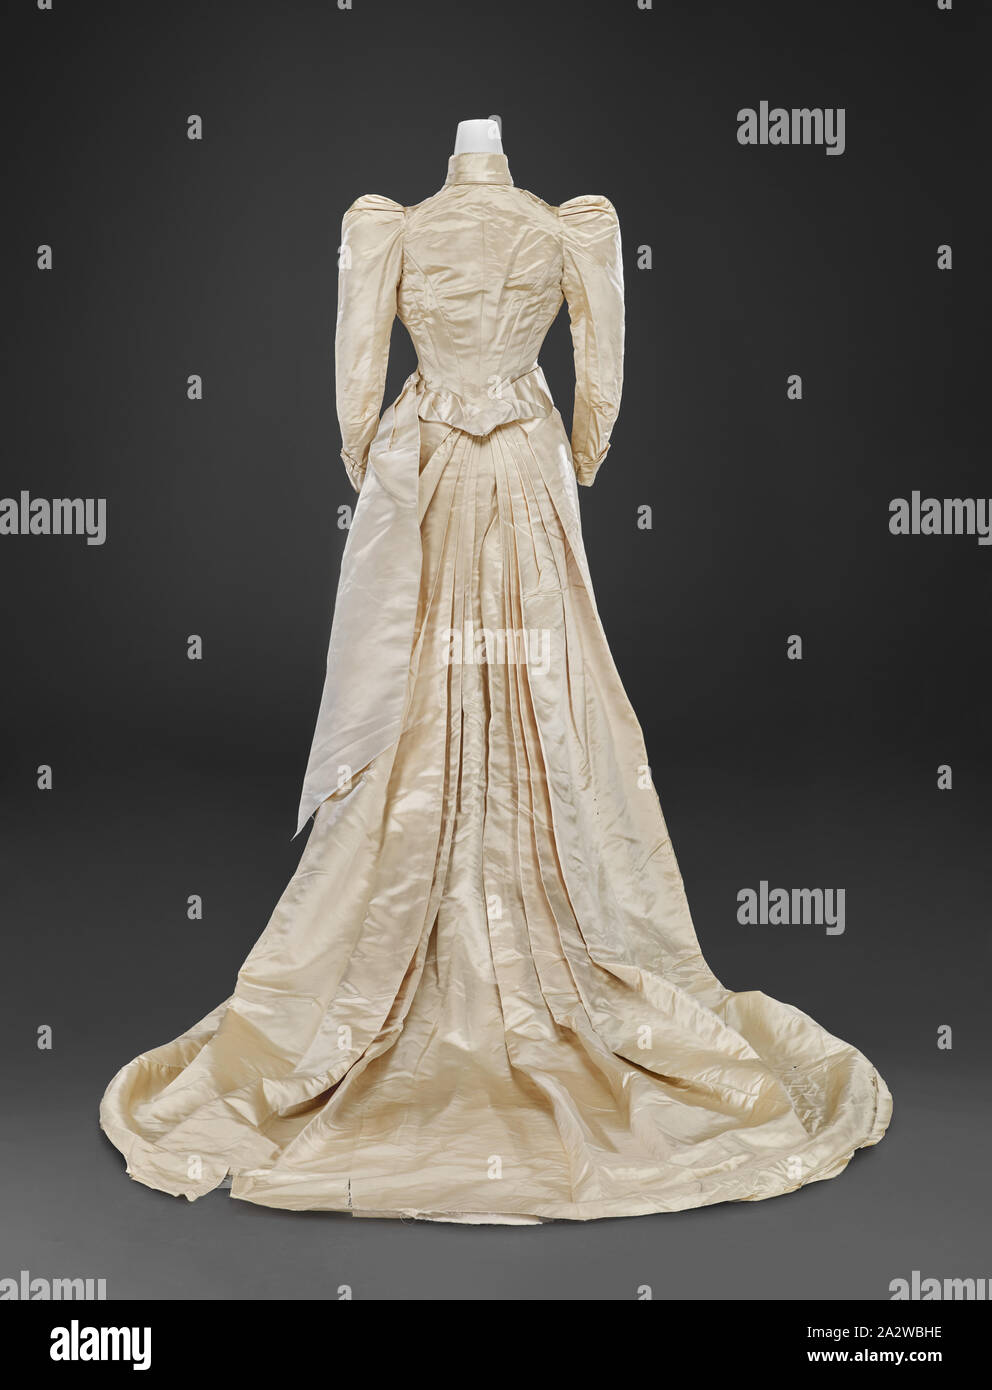 wedding gown (bodice, skirt, train), Louis Valentin, Dressmaker (American, born Hungarian, about 1859-1937), 1890, silk, lace, A) bodice: center back 17 in., center front 15 in., bust 30-1/2 in., waist 23-1/2 in., sleeve length 19 in., shoulders 11 in. B) skirt: center back 38-1/2 in., center front 38-1/2 in., waist 19 in., hips 40 in. C) train: 70 x 50 in. D) fabric fragment: 110 x 11-1/4 in. E) fabric fragment: 23-1/2 x 14 in., A) bodice: Label, sewn: Louis Valentin, Boston Label, handwritten and sewn: Mary Addison Bybee, October 15 1890, Indianapolis Indiana, Textile and Fashion Arts Stock Photo